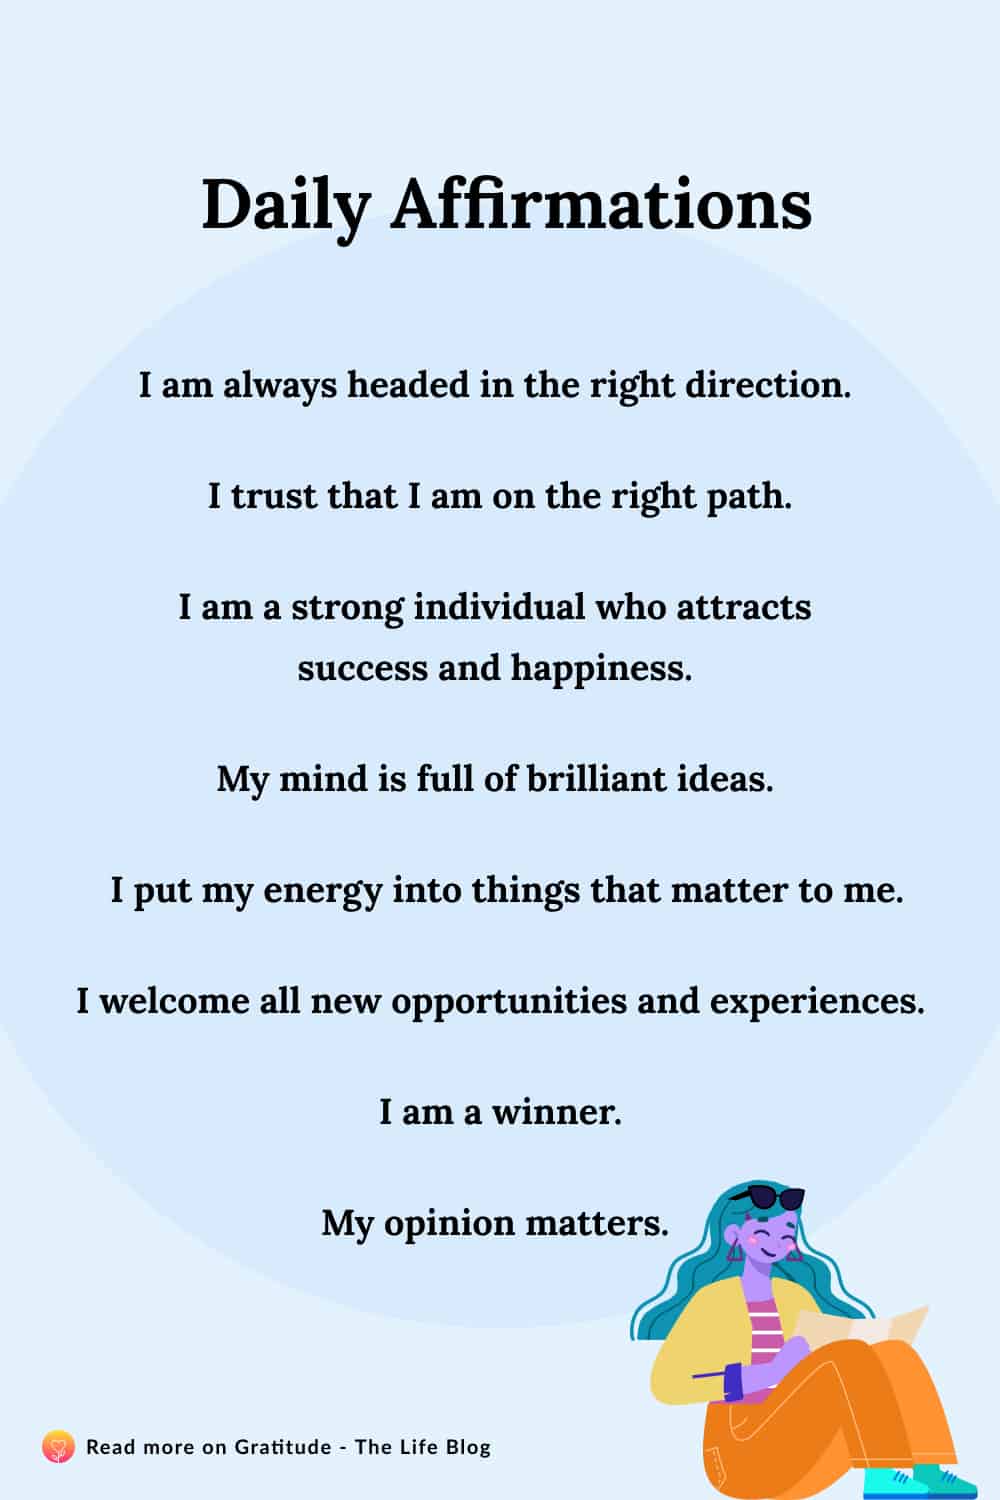 Image with list of daily affirmations